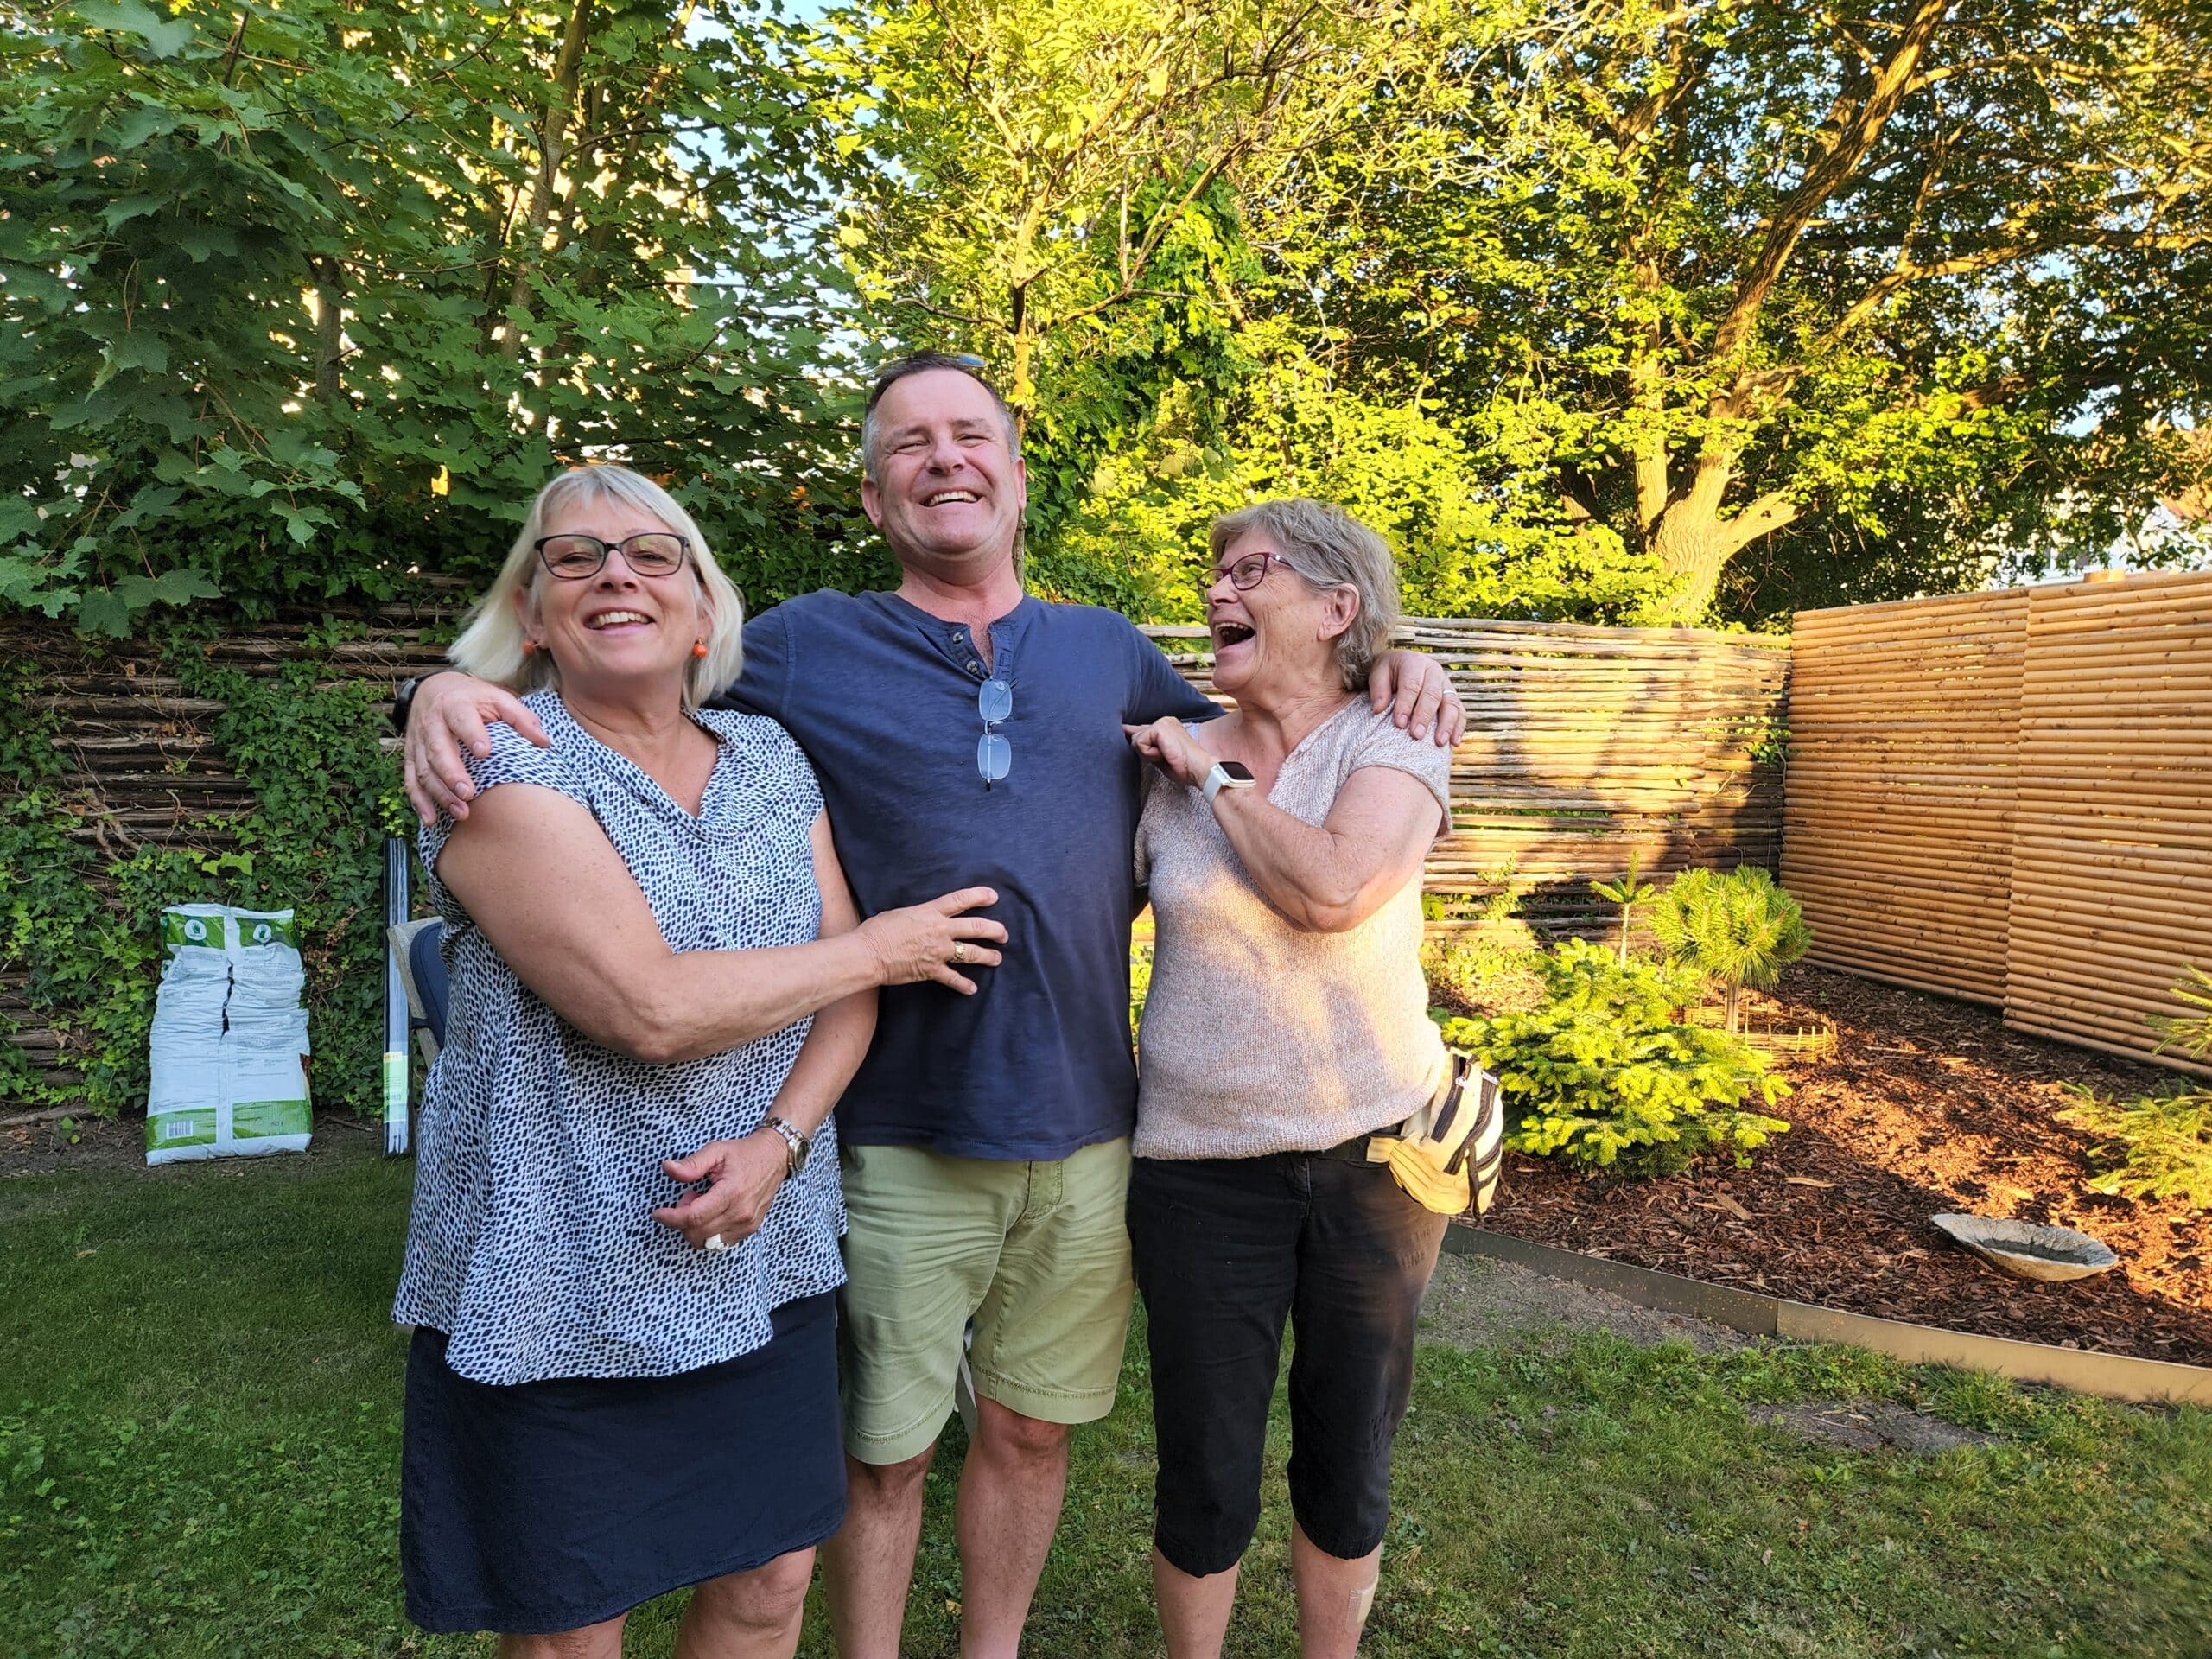 David (center) with his sister-in-law Merete (left) and his sister Anne-Mette (right)